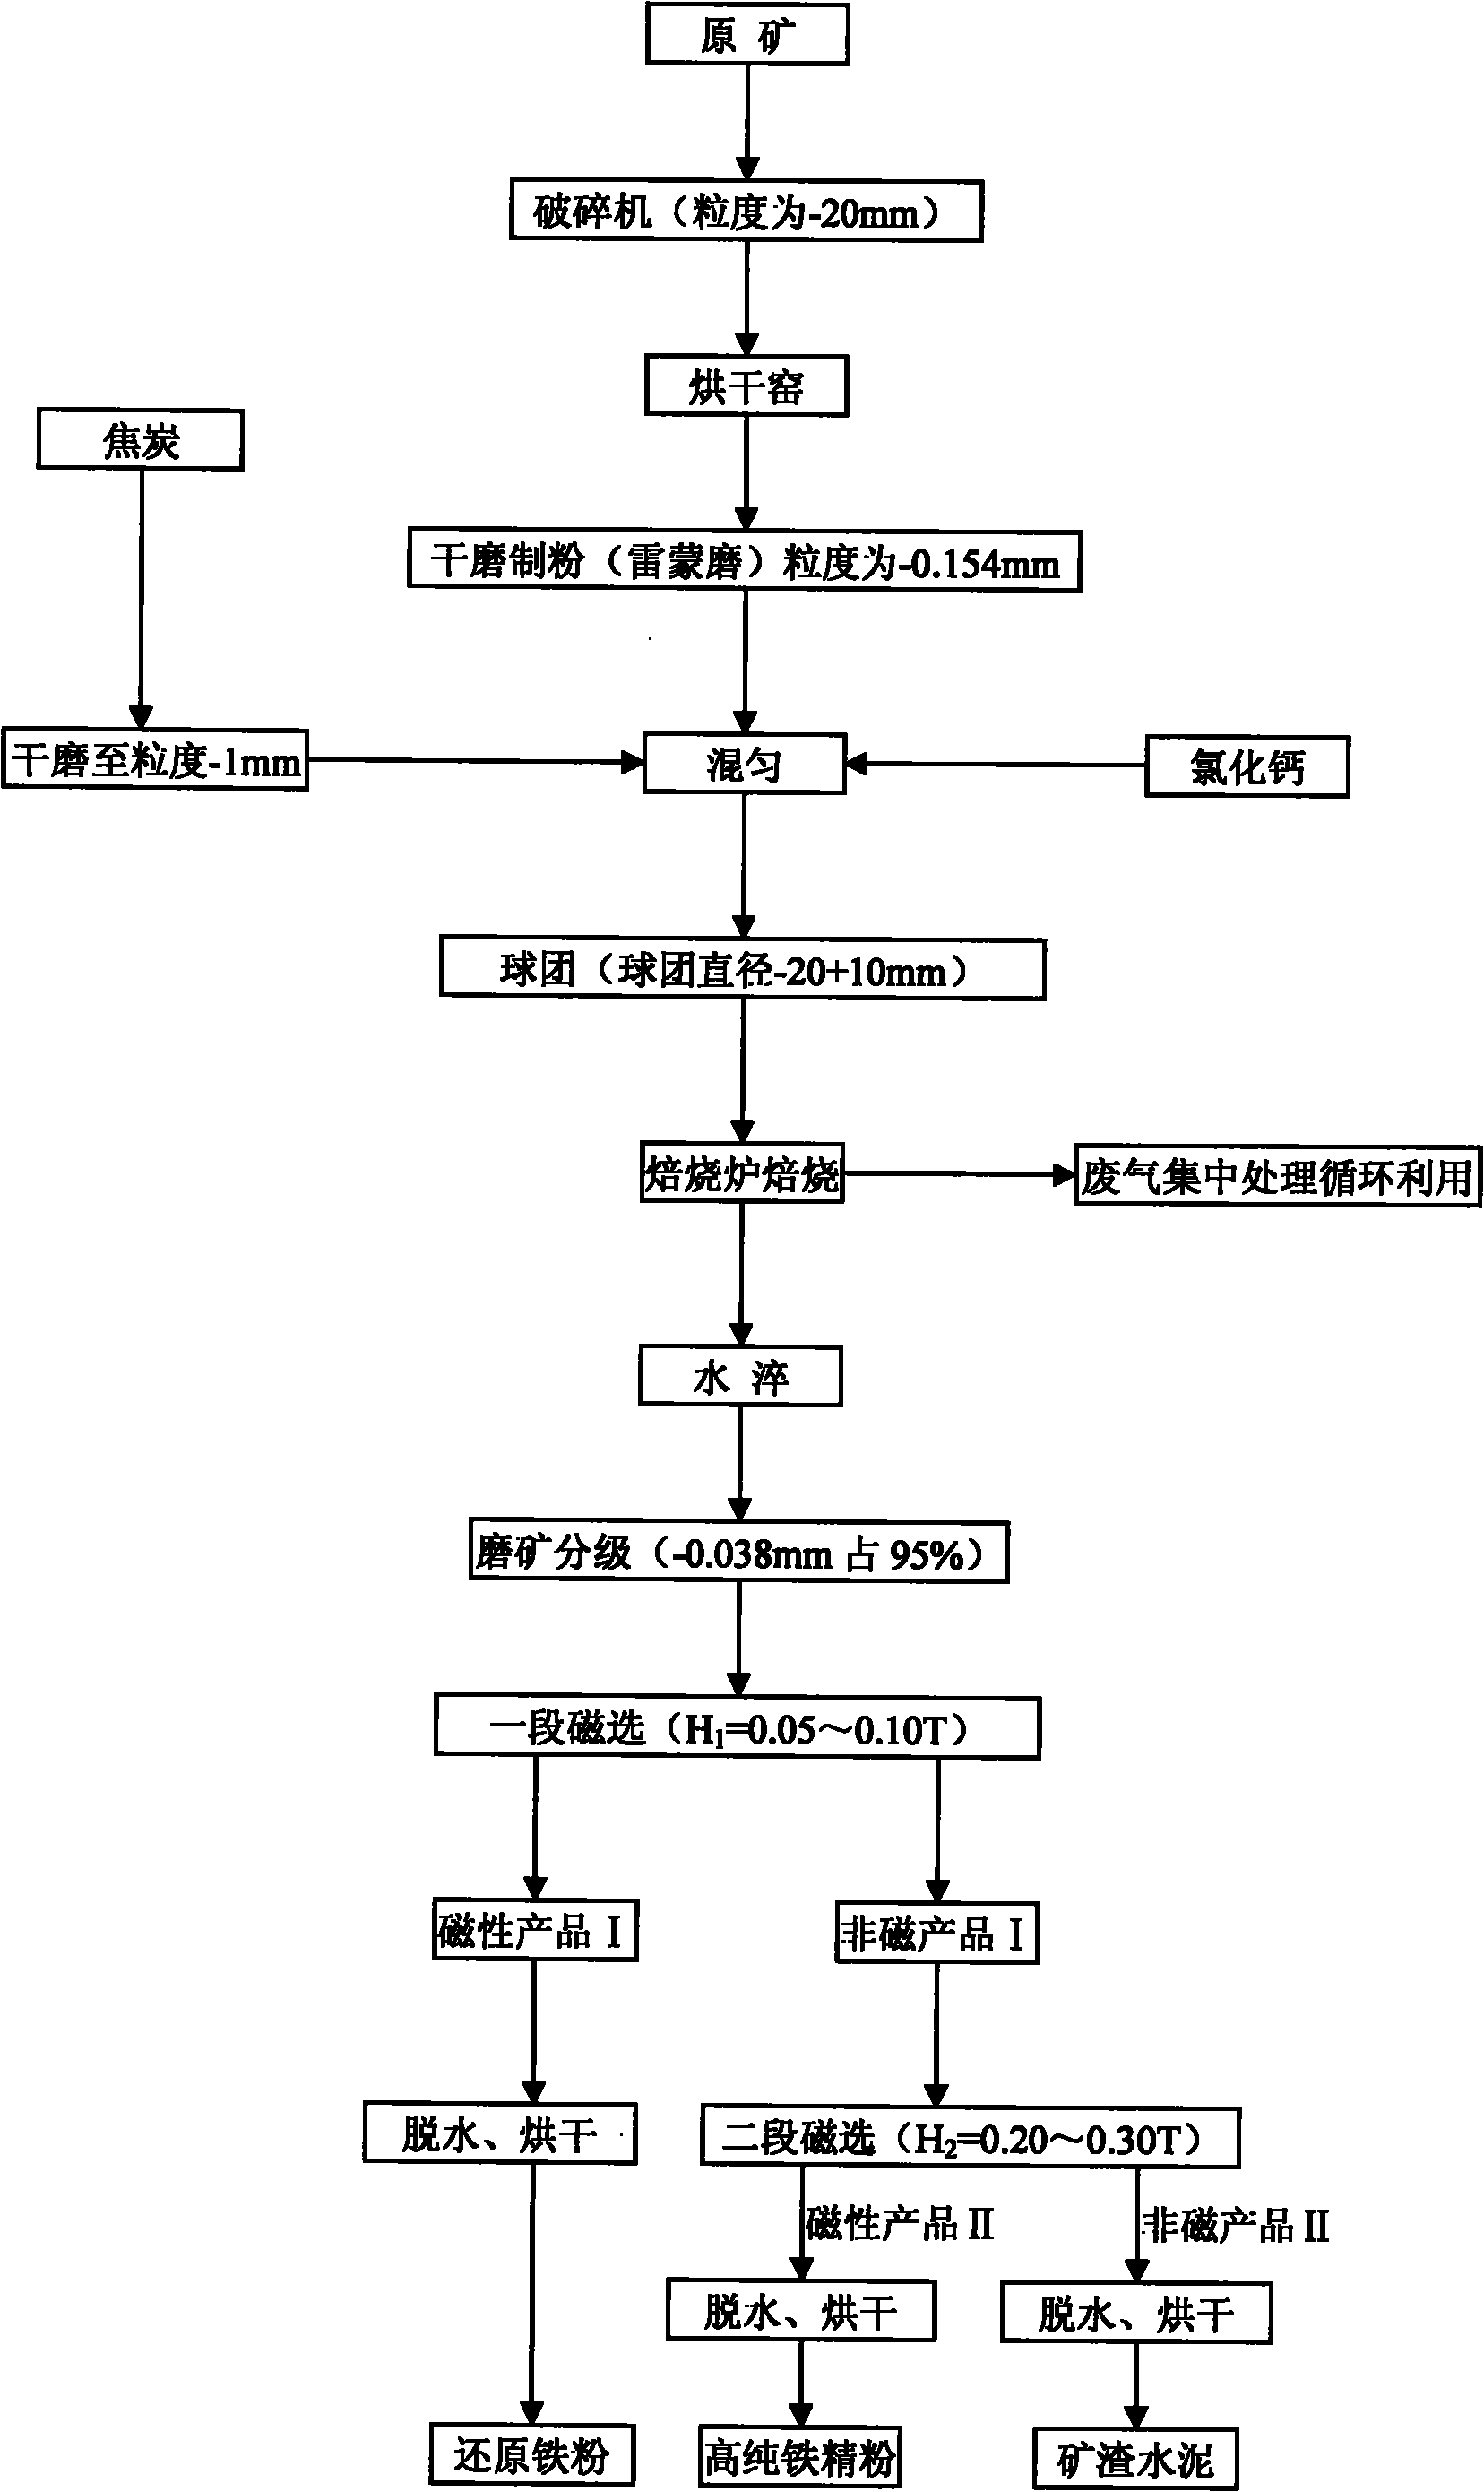 Method for preparing reductive iron powder and high-purity refined iron powder by using iron ores